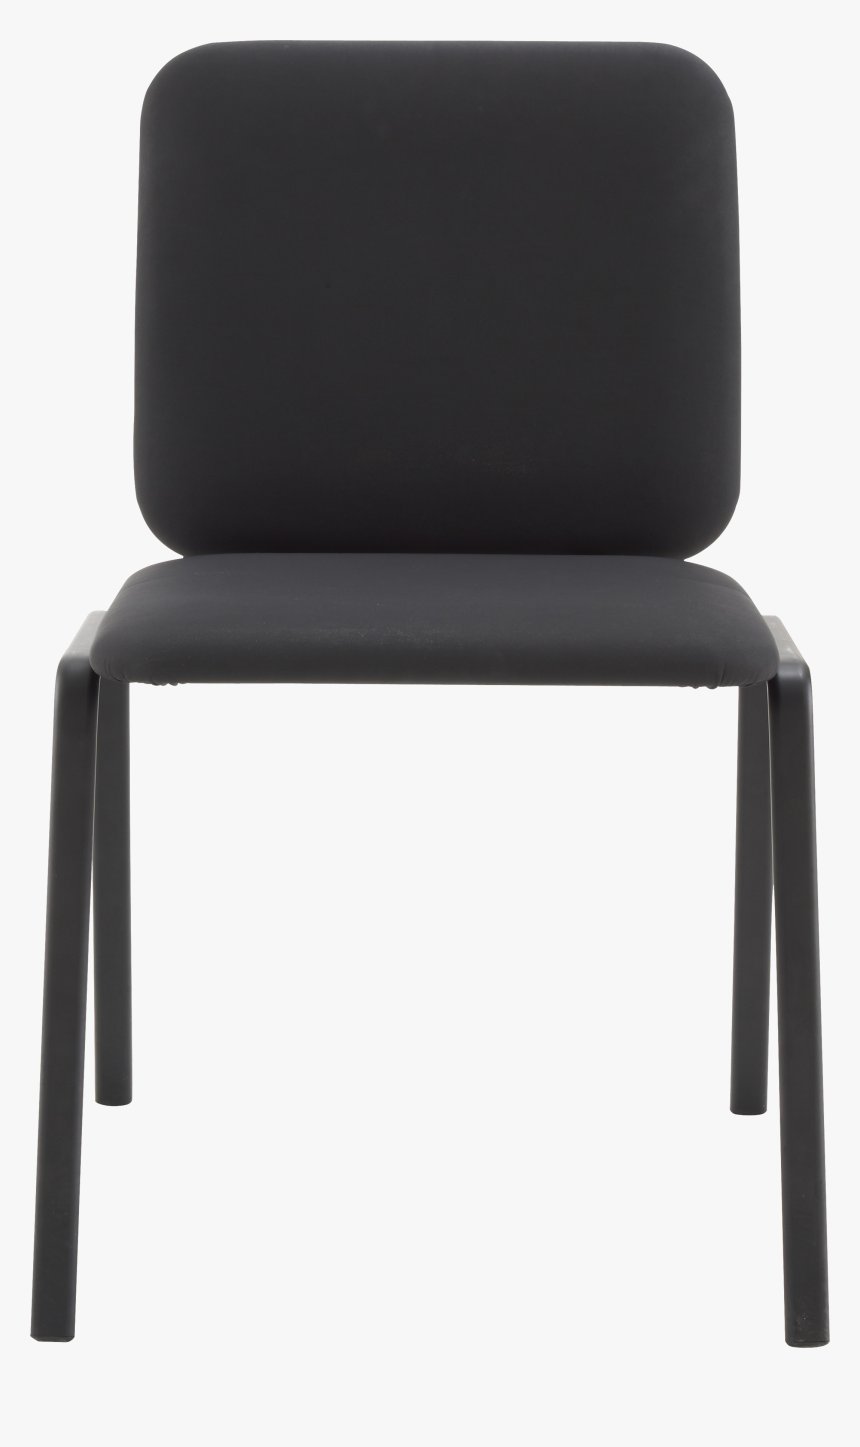 Chair Png Image - Transparent Background Black Chair Png, Png Download, Free Download